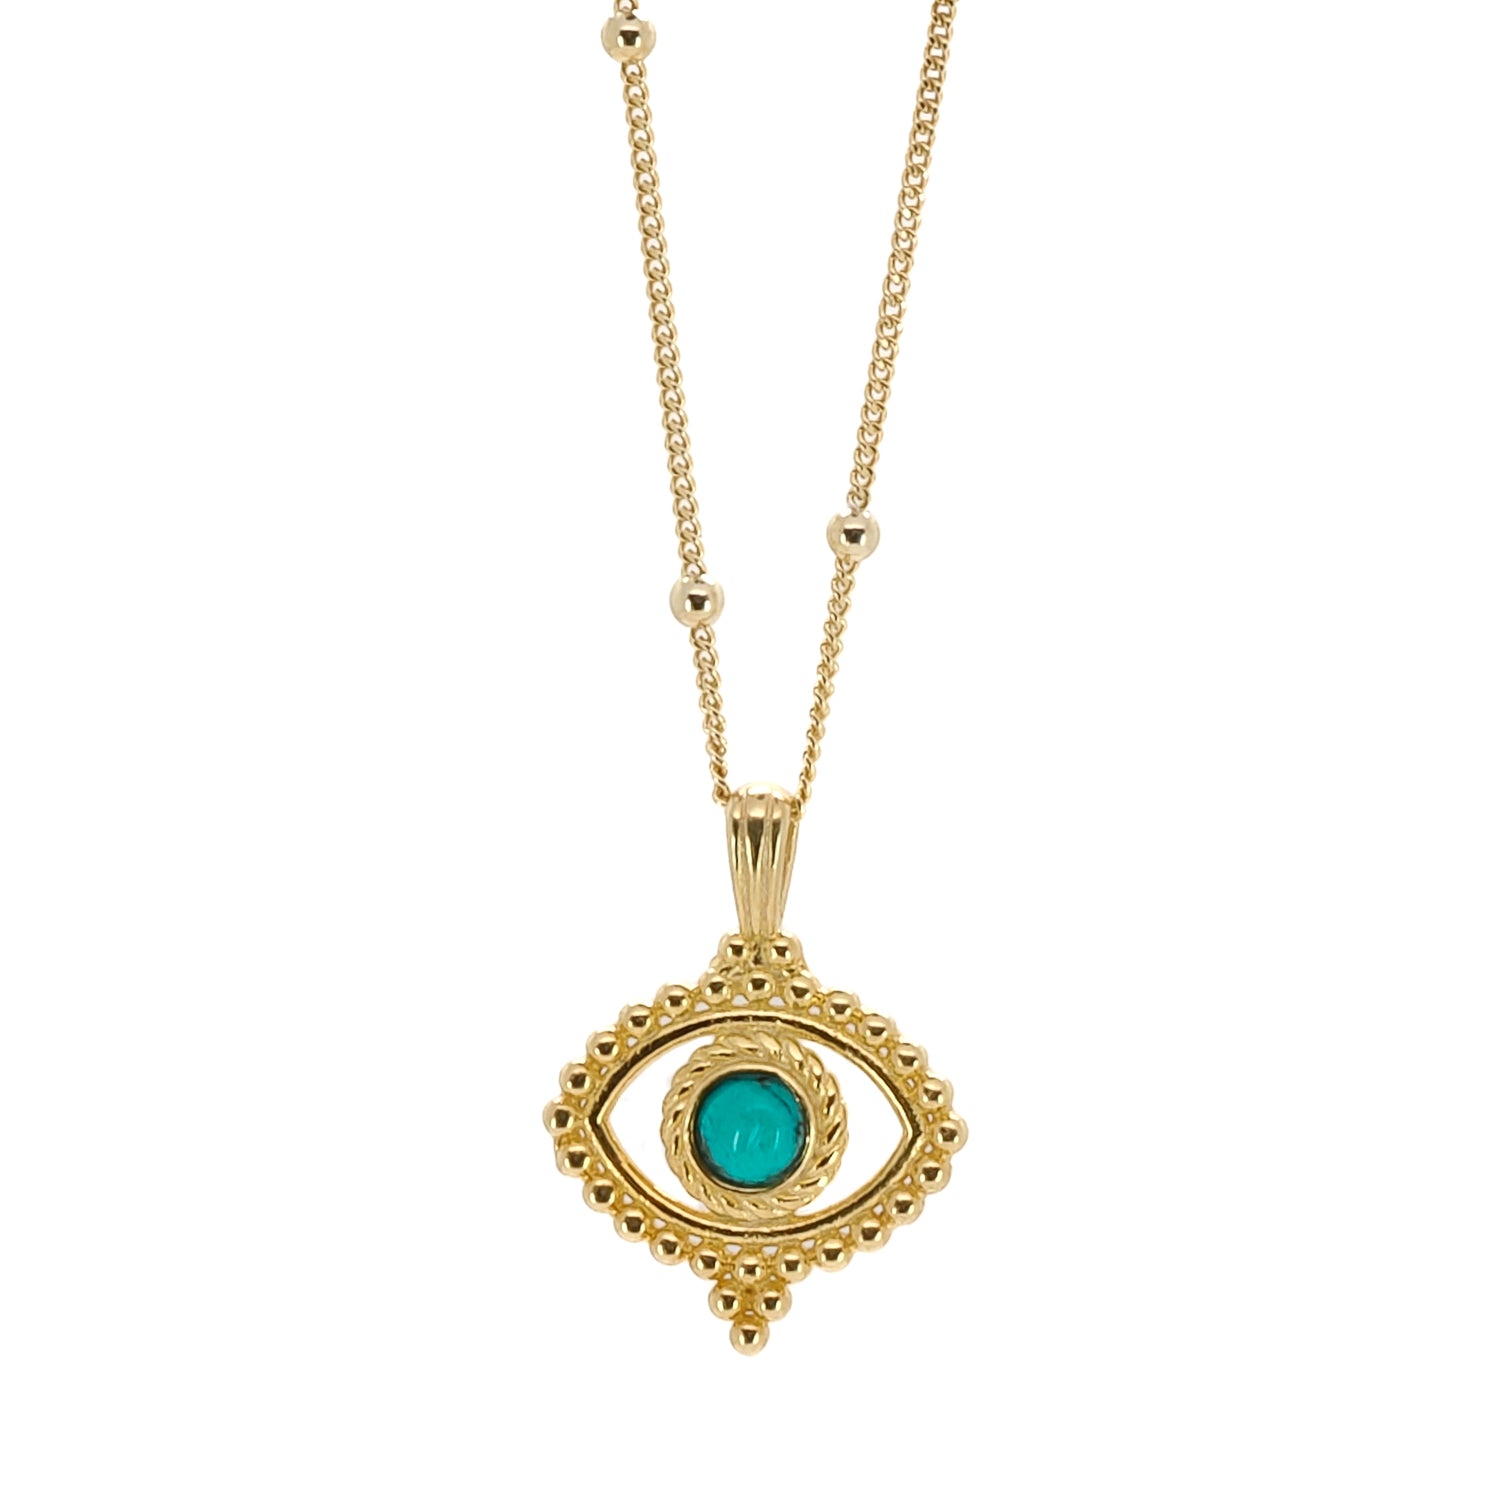 Vibrant Color and Meaning: Evil Eye Necklace with Turquoise